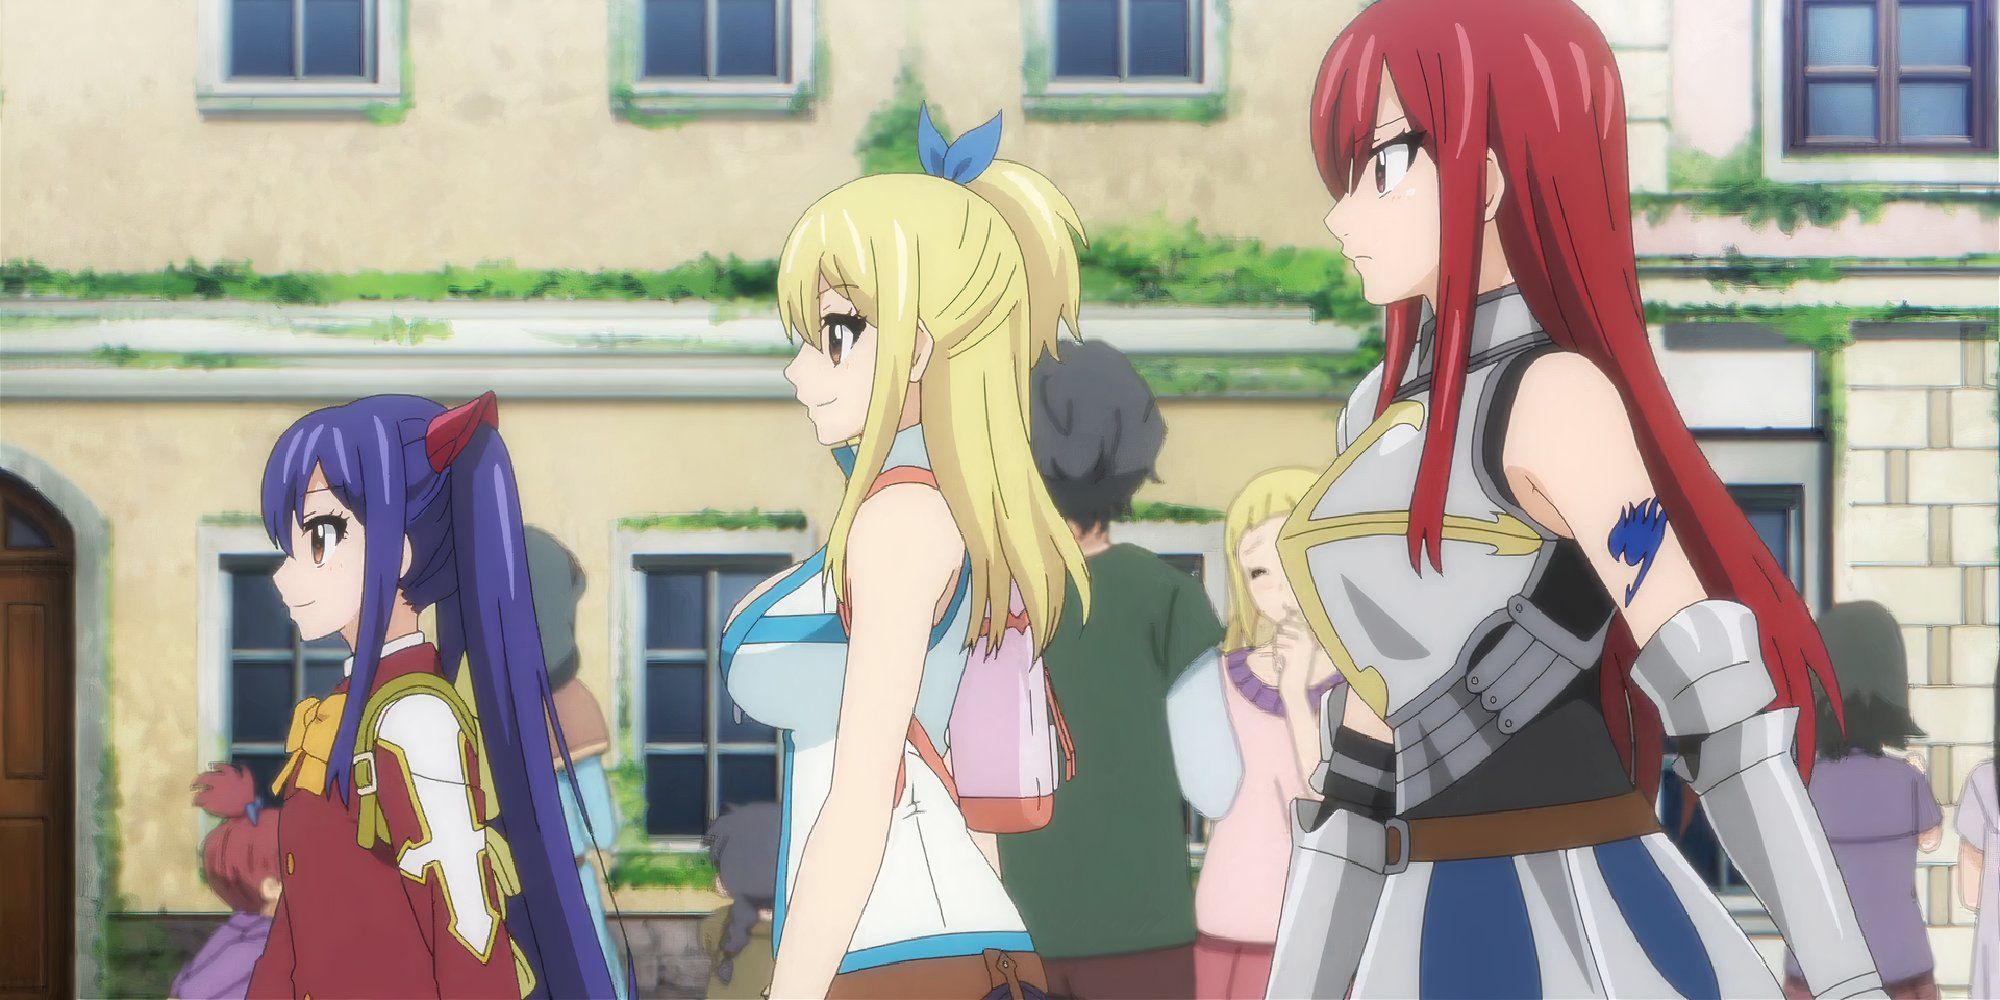 wendy, lucy and erza from fairy tail walking through elmina in the 100 years quest anime